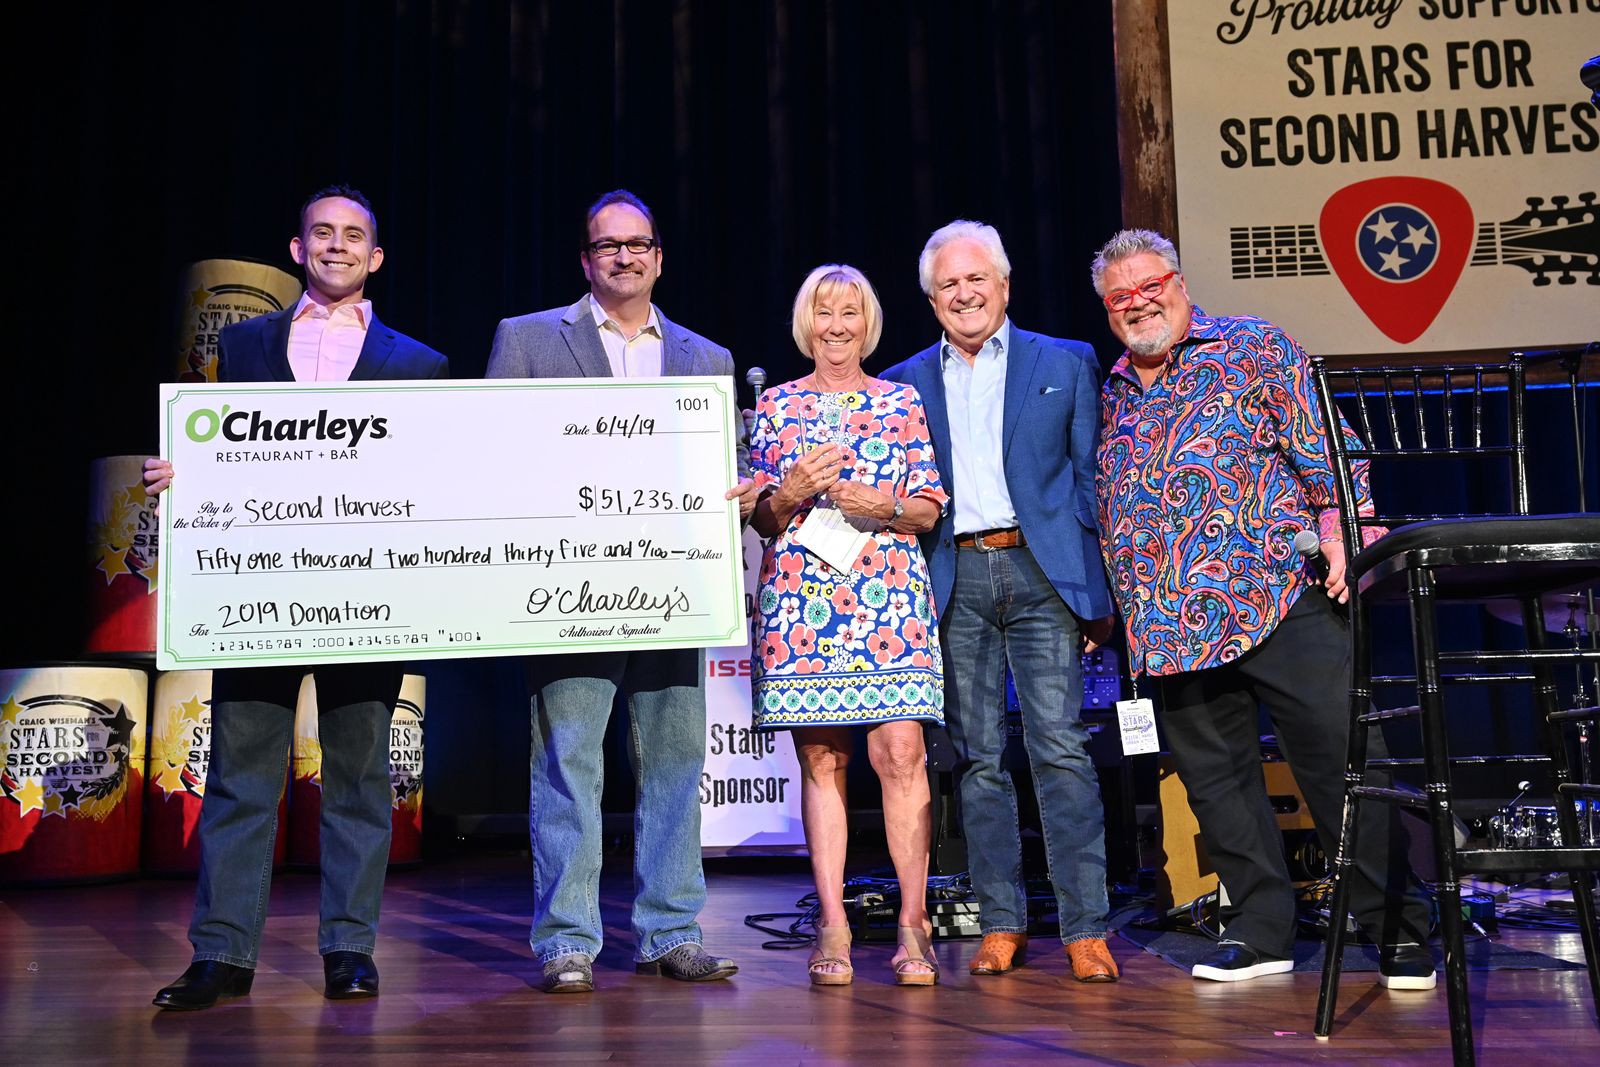 Pictured: O'Charley's Regional Vice President Ian Geralds, O'Charley's Senior Vice President of Operations Chuck Westphal, Second Harvest President & CEO Jaynee Day, O'Charley's Chief Concept Officer of Family Dining Bob Langford and Craig Wiseman.